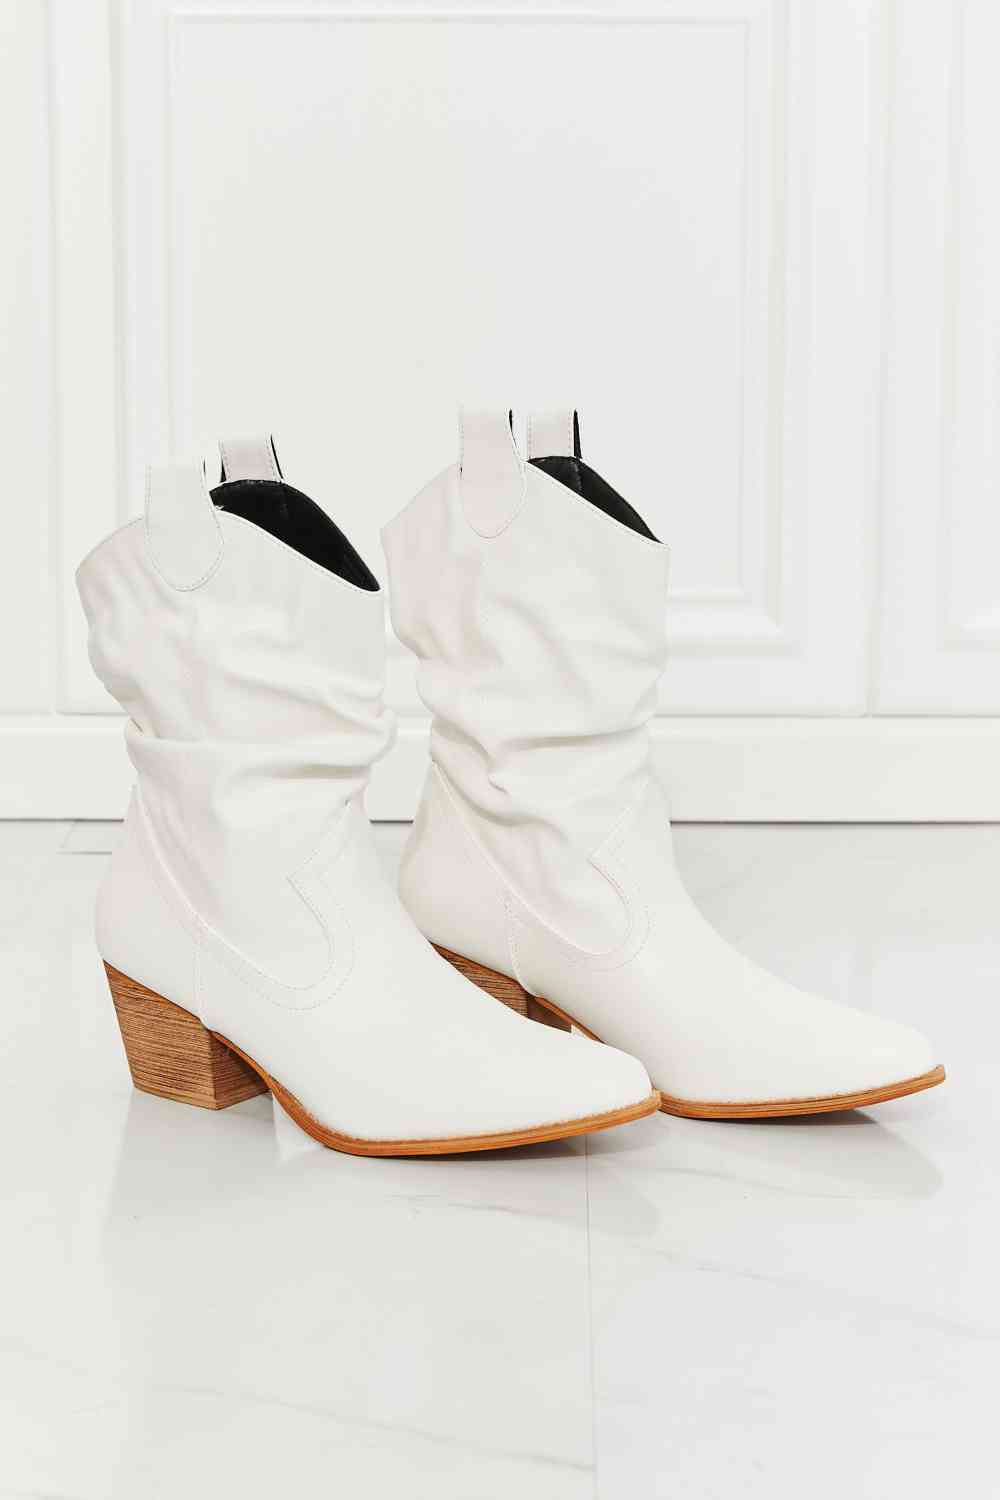 MMShoes Better in Texas Scrunch Cowboy Boots in White by VYSN